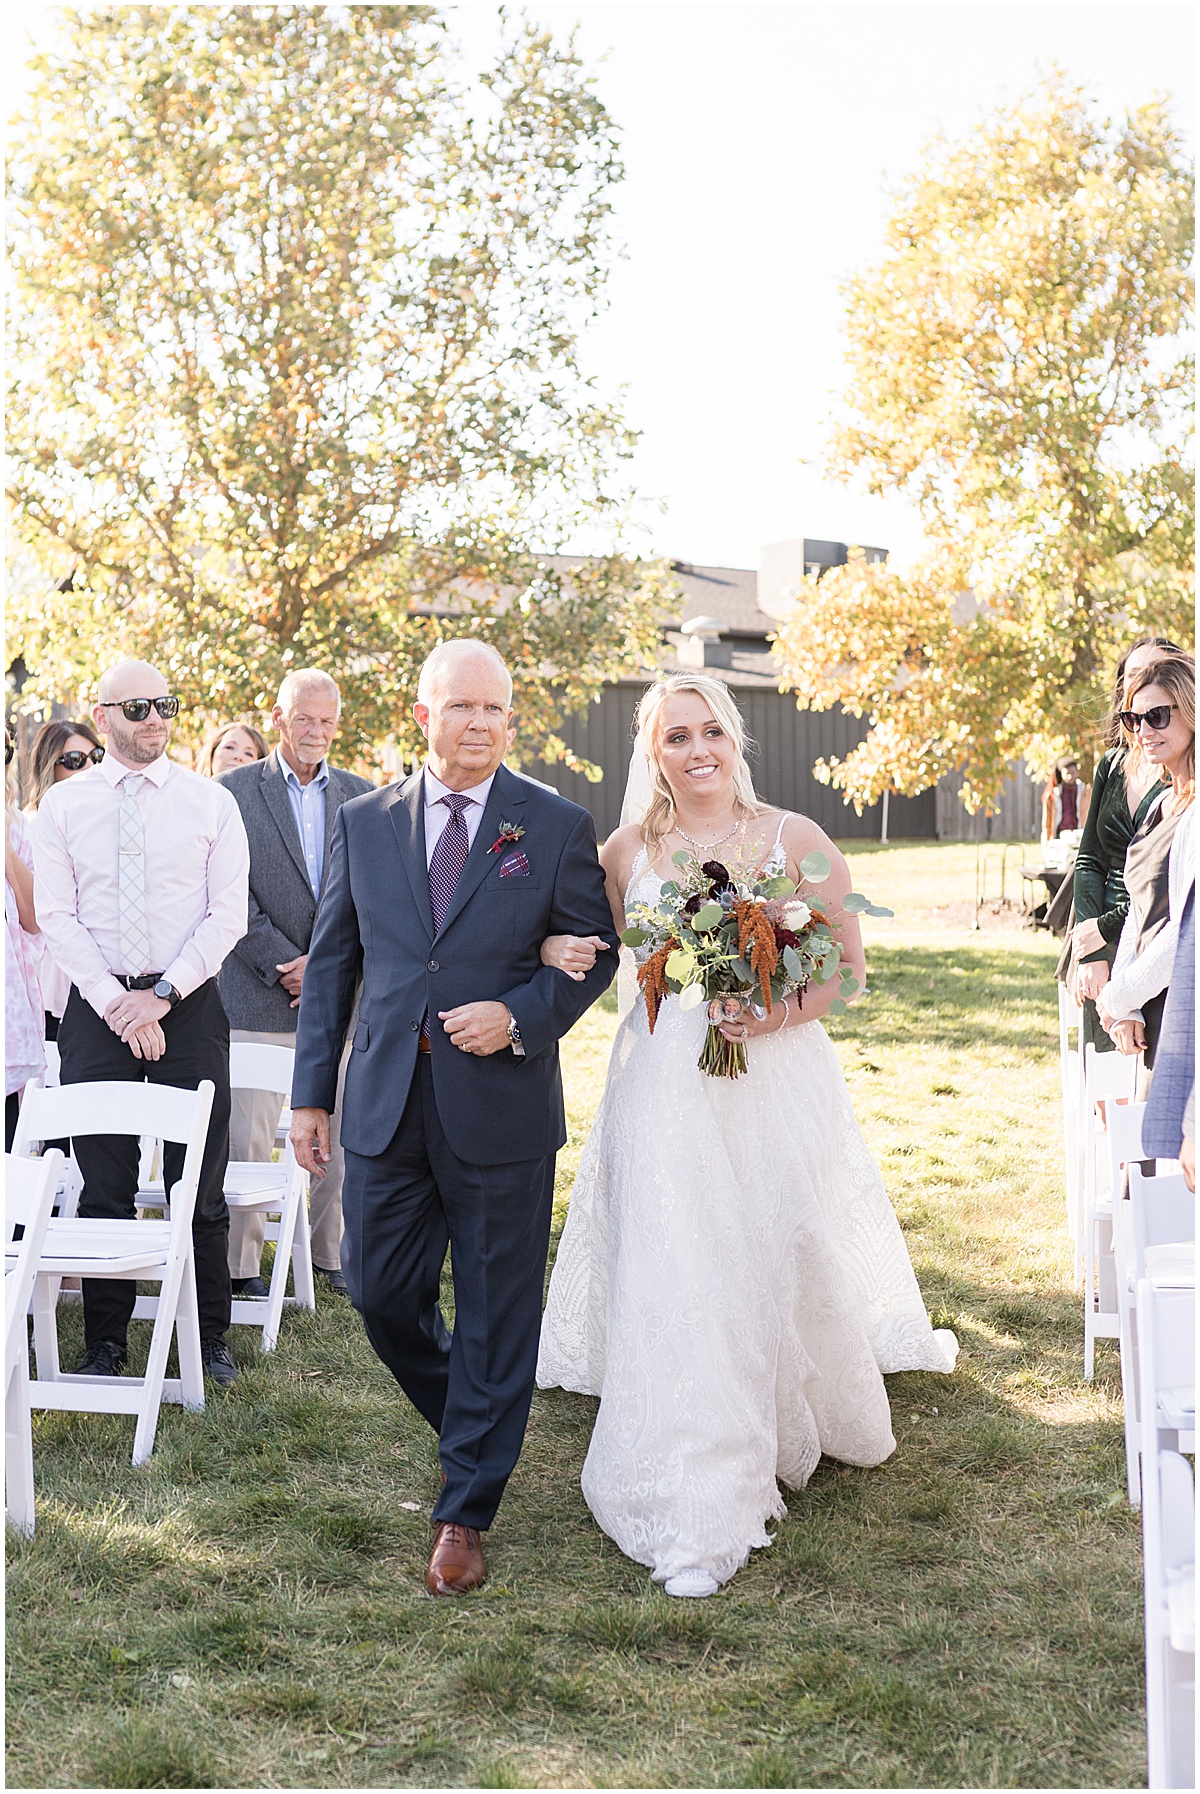 Bride walking down the aisle at Finley Creek Vineyards wedding in Zionsville, Indiana